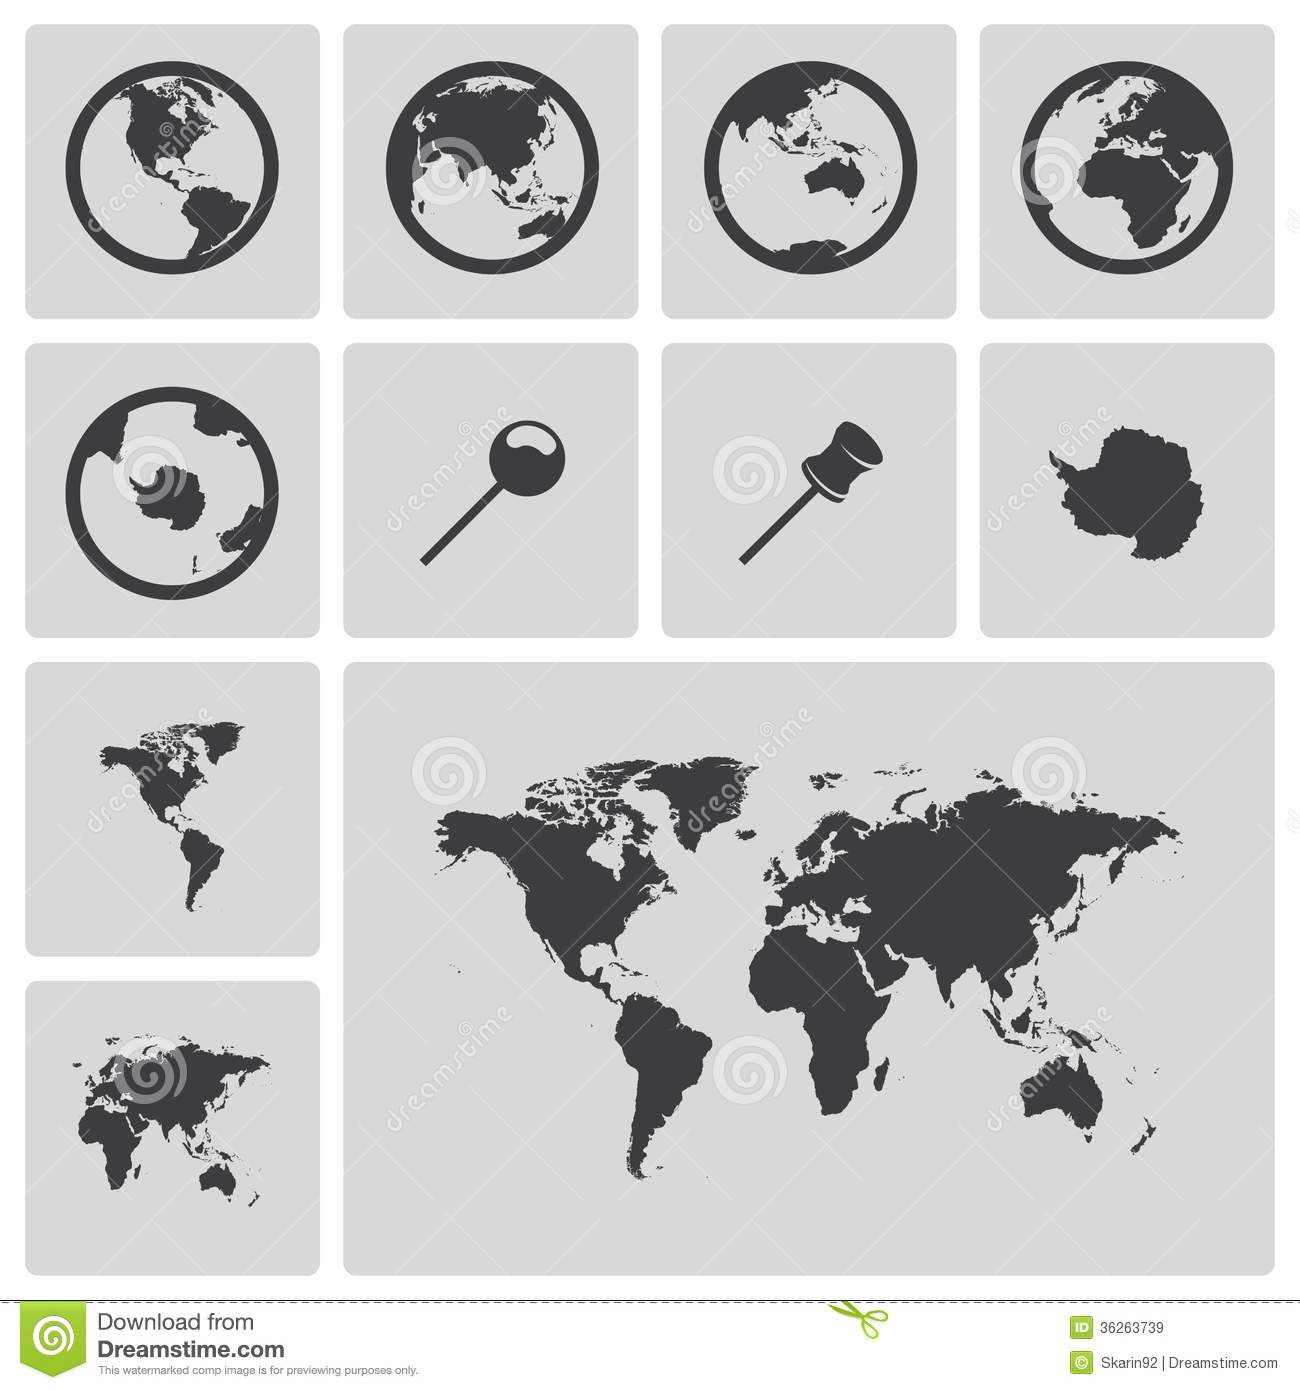 Black and White World Map Vector